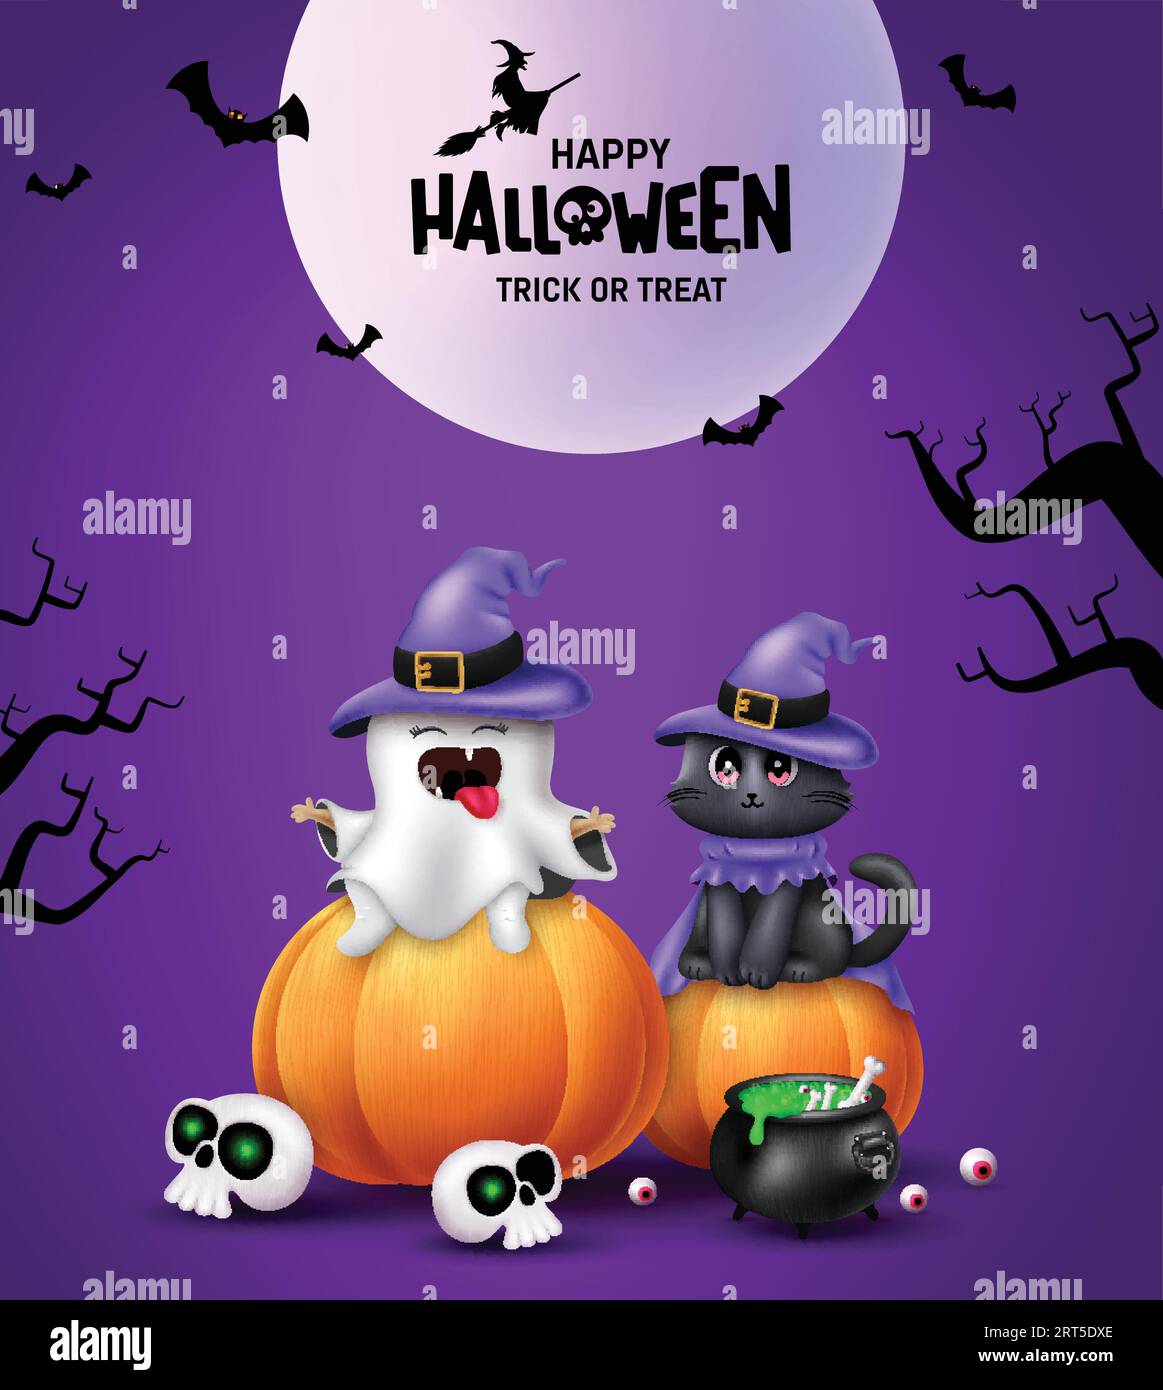 Halloween ghost character vector design. Happy halloween text with cute kitten character seating in pumpkin elements in full moon night background. Stock Vector